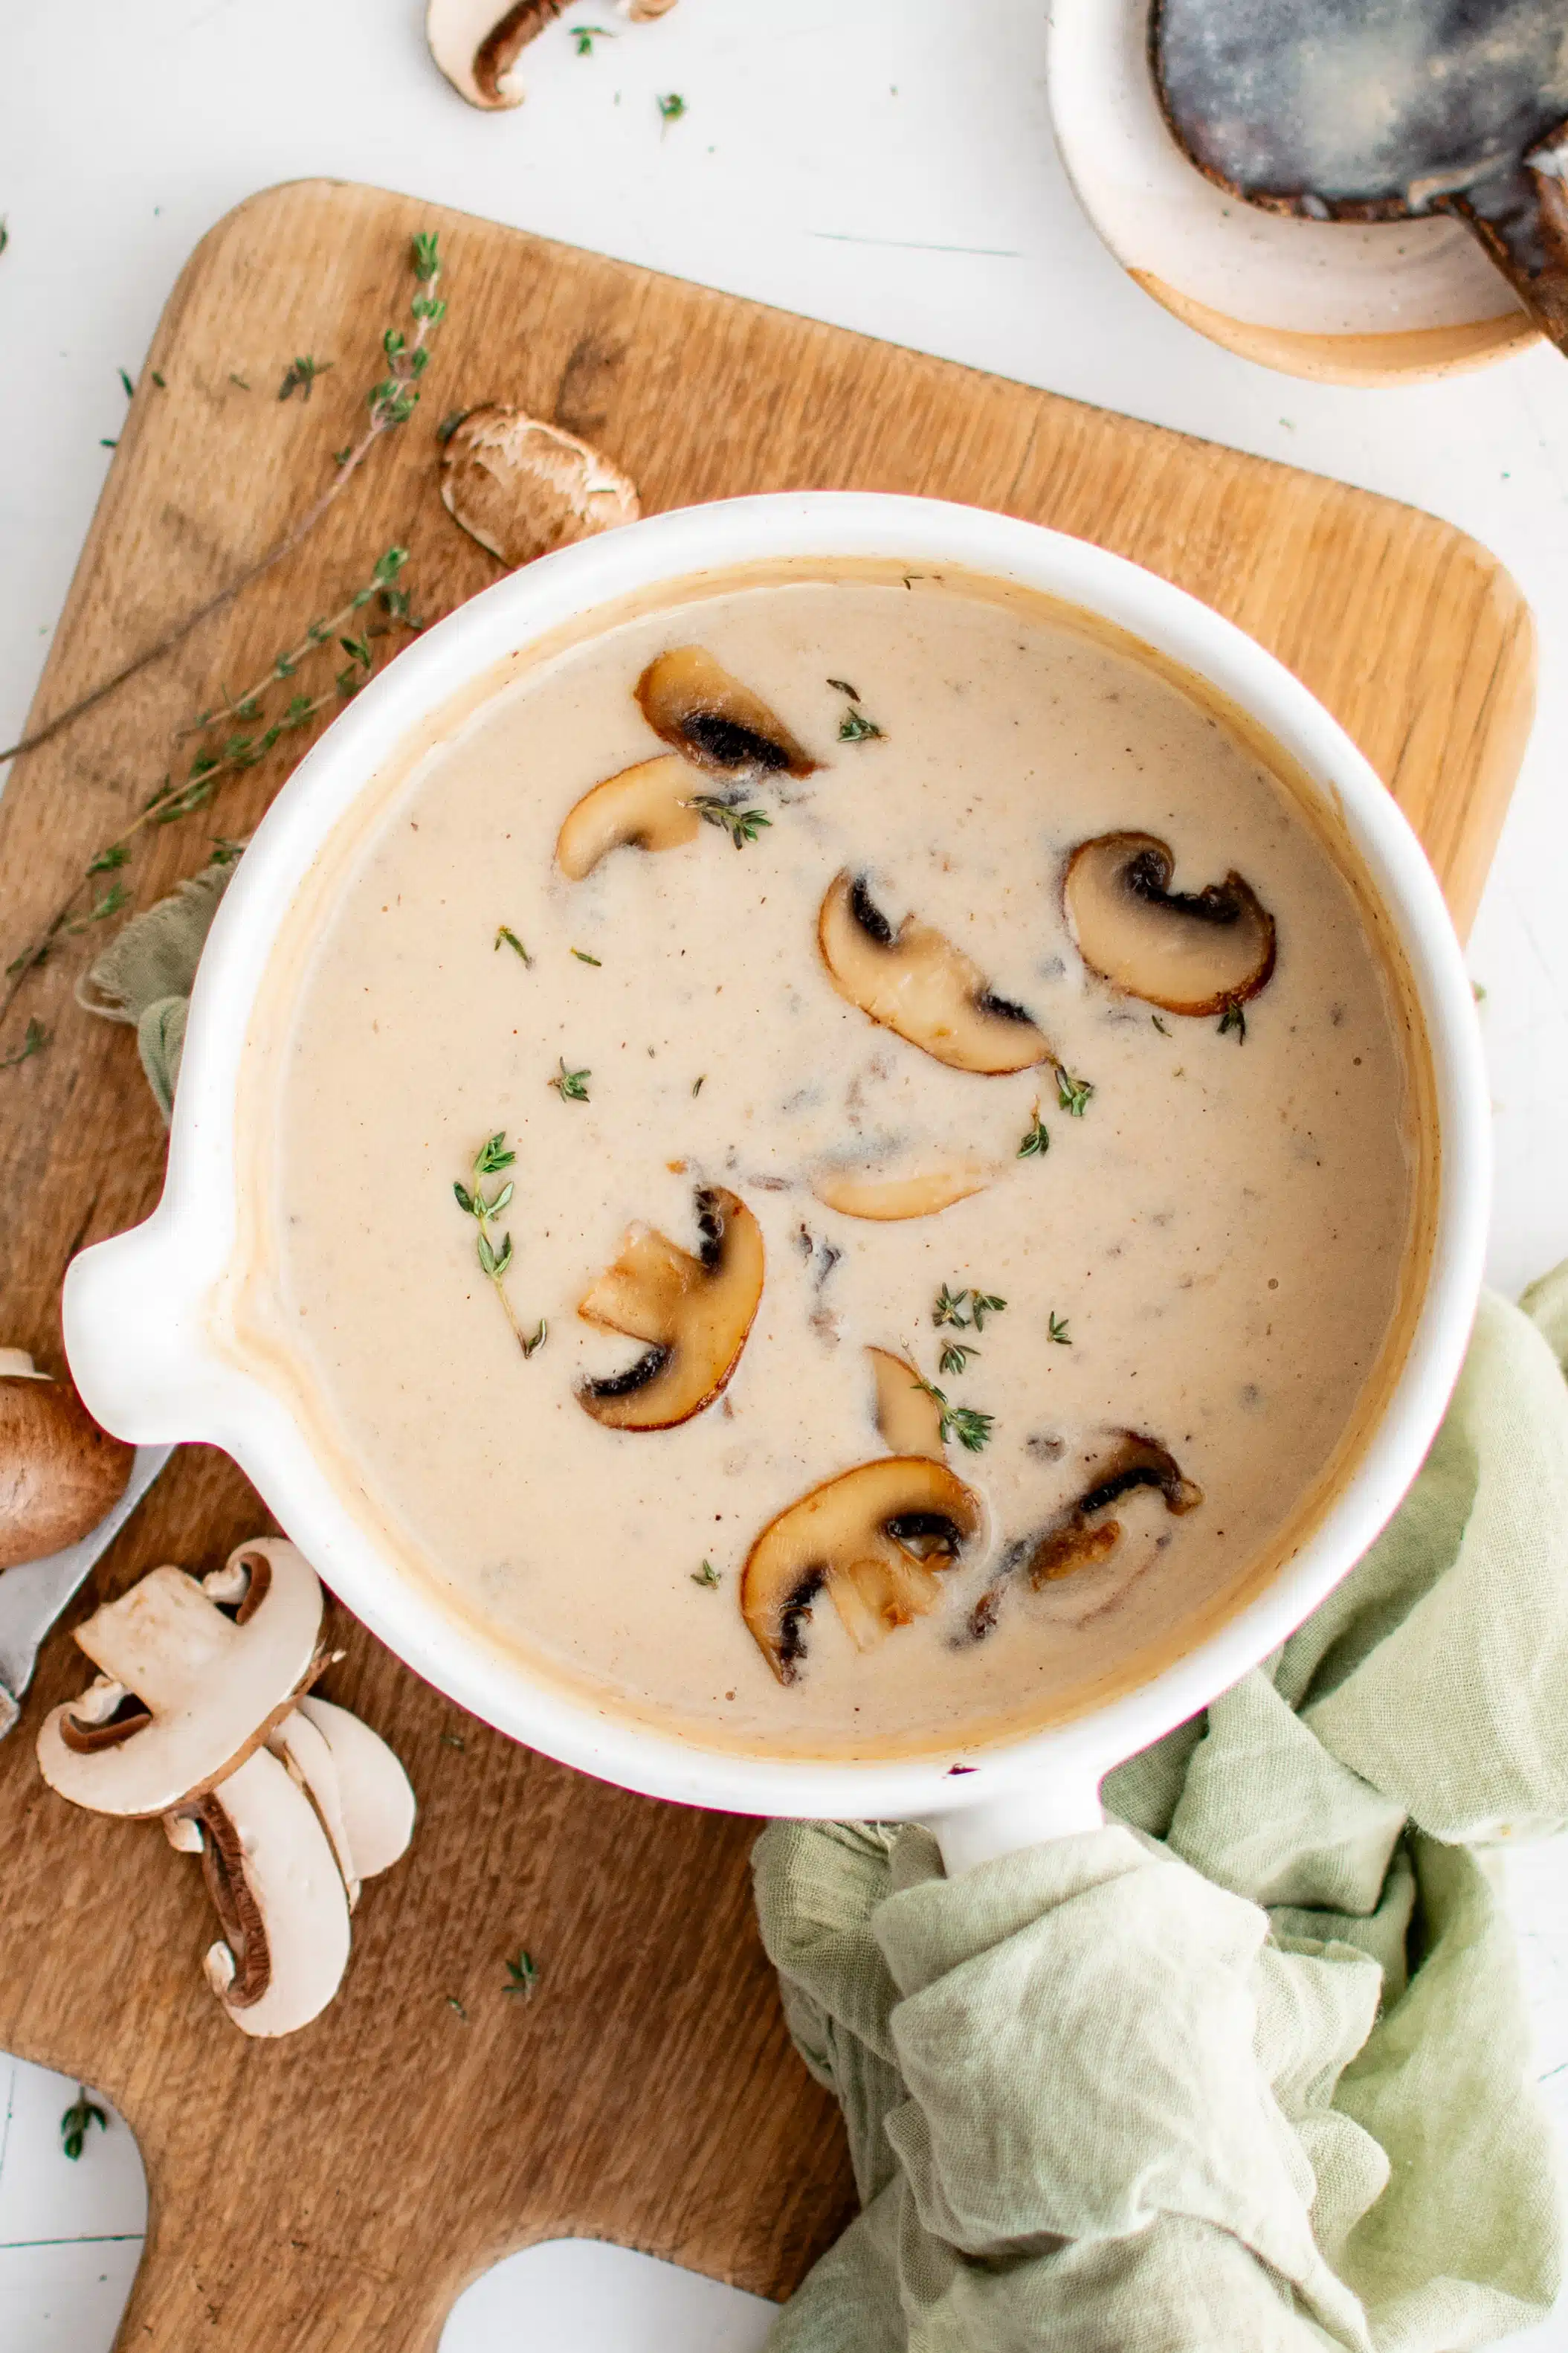 White Dutch oven filled with cream of mushroom soup and topped with caramelized sliced mushrooms and fresh thyme.